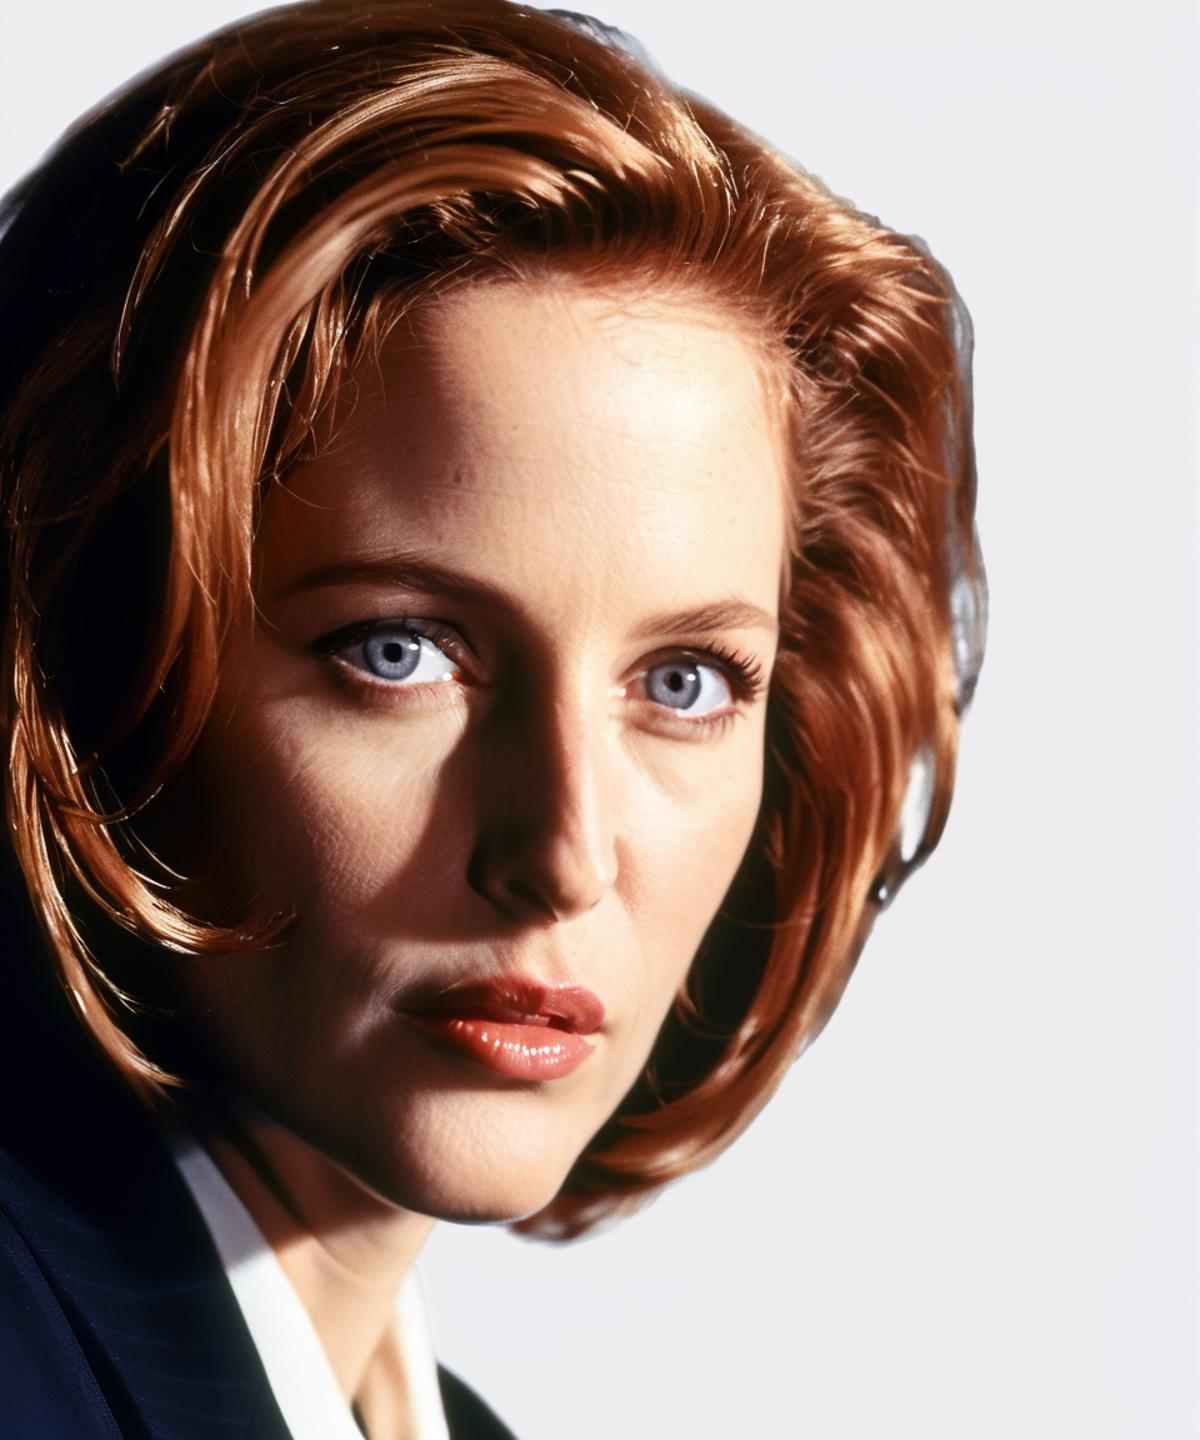 Character: Dana Scully image by kenpachii26205